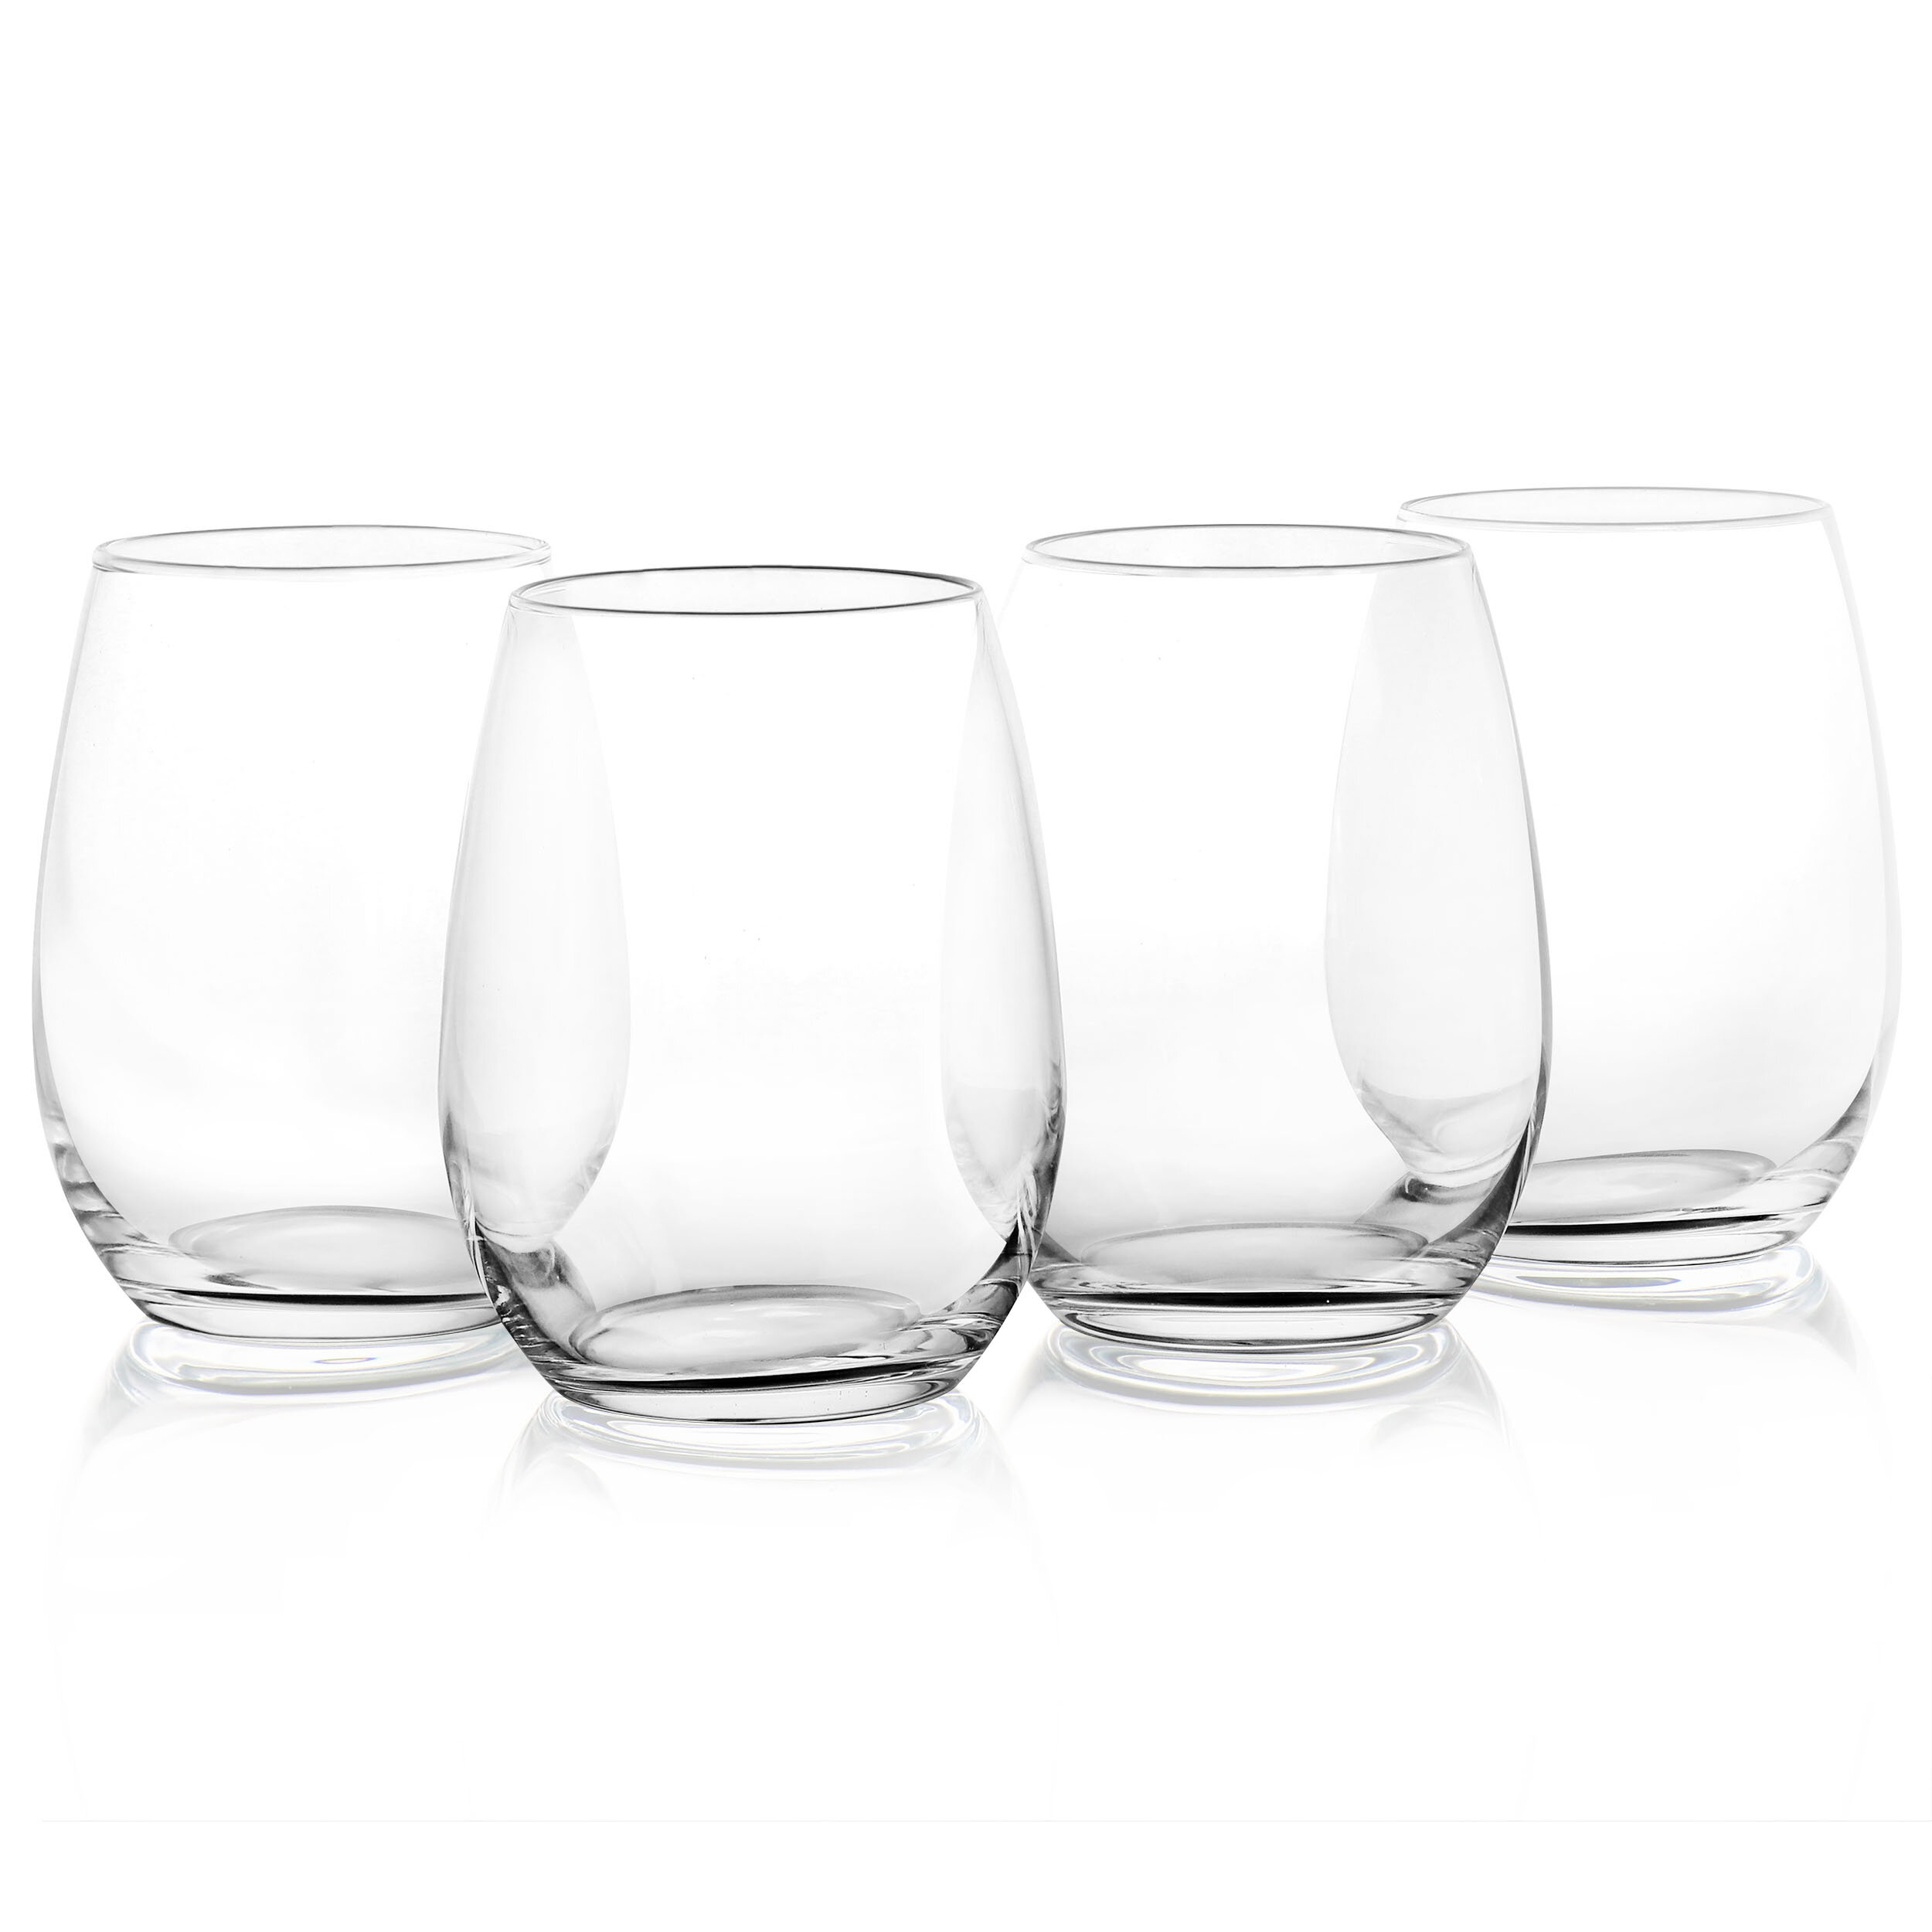 Basics All-Purpose Wine Glasses, 19-Ounce, Set of 4, Clear